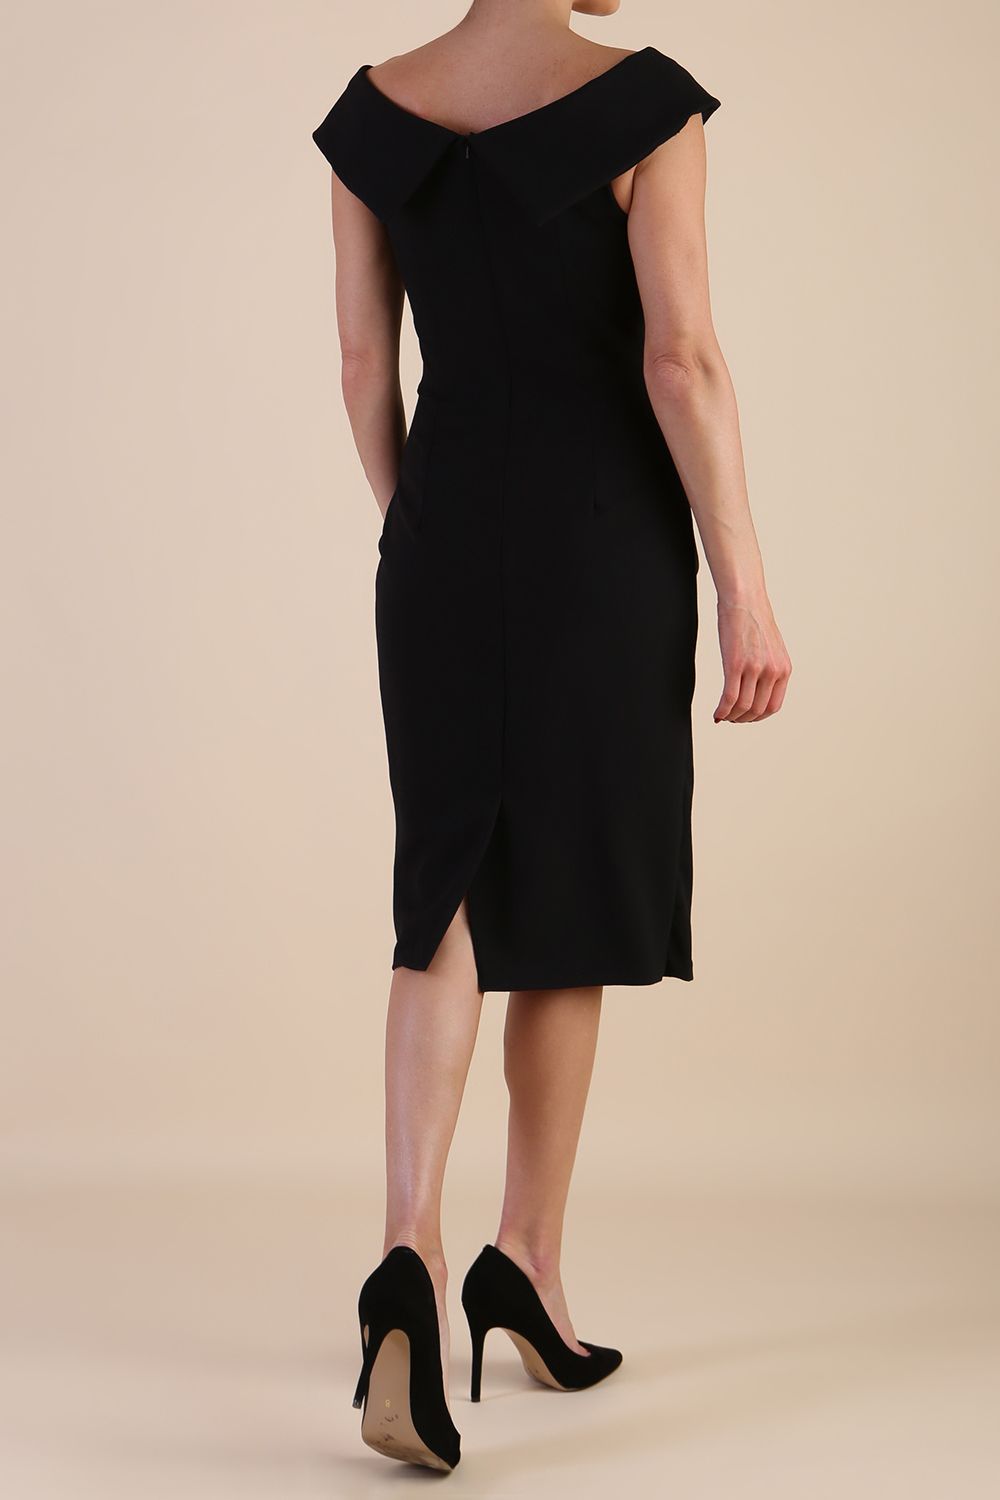 brunette model wearing diva catwalk evening pencil skirt dress sleeveless with lowered neckline and pleating on side in black colour front